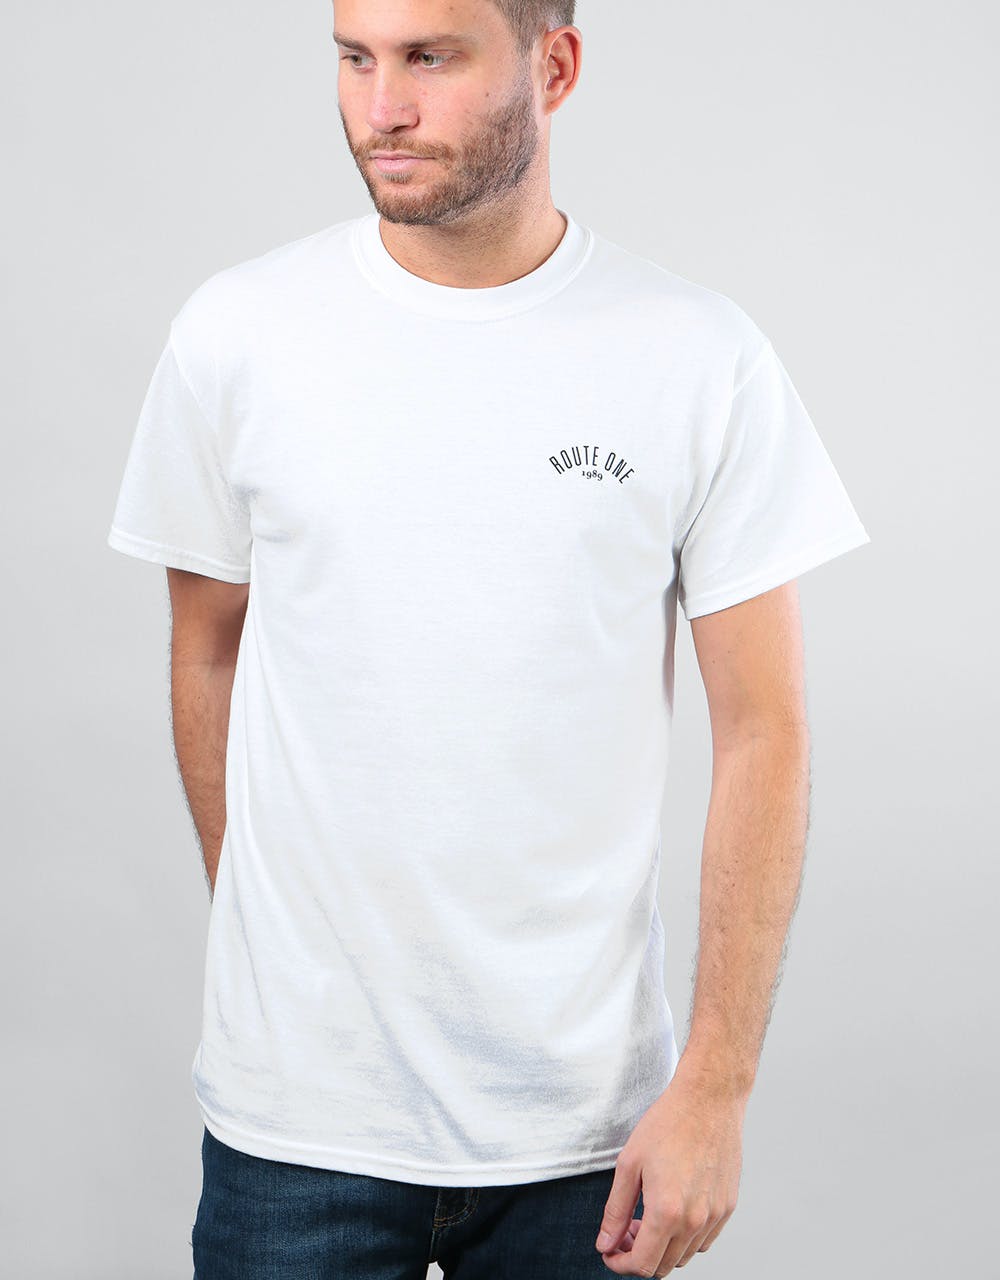 Route One Four Corners T-Shirt - White